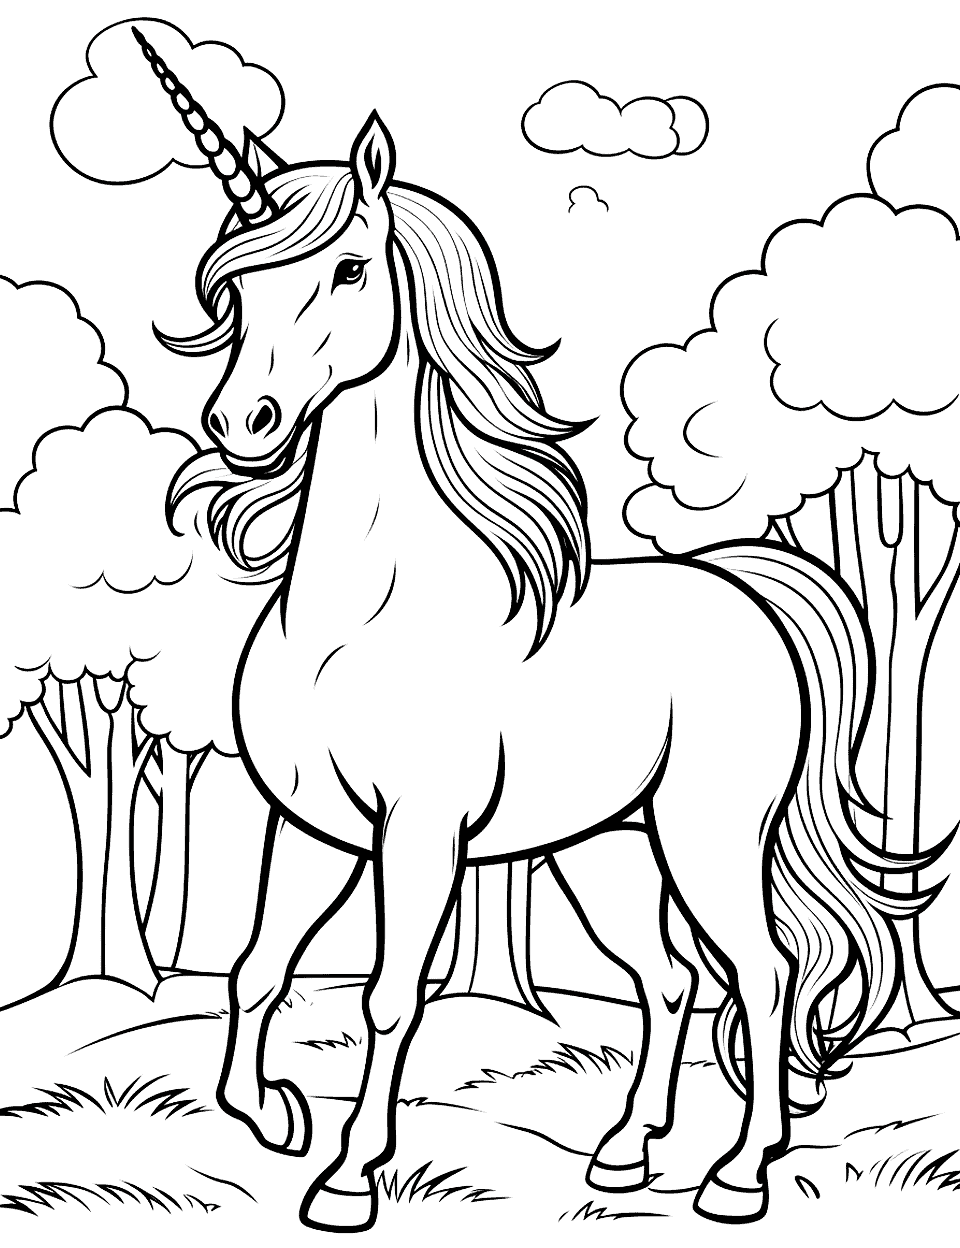 Realistic Unicorn Coloring Page - A coloring page featuring a realistic-looking unicorn standing in a forest, looking majestic and powerful.